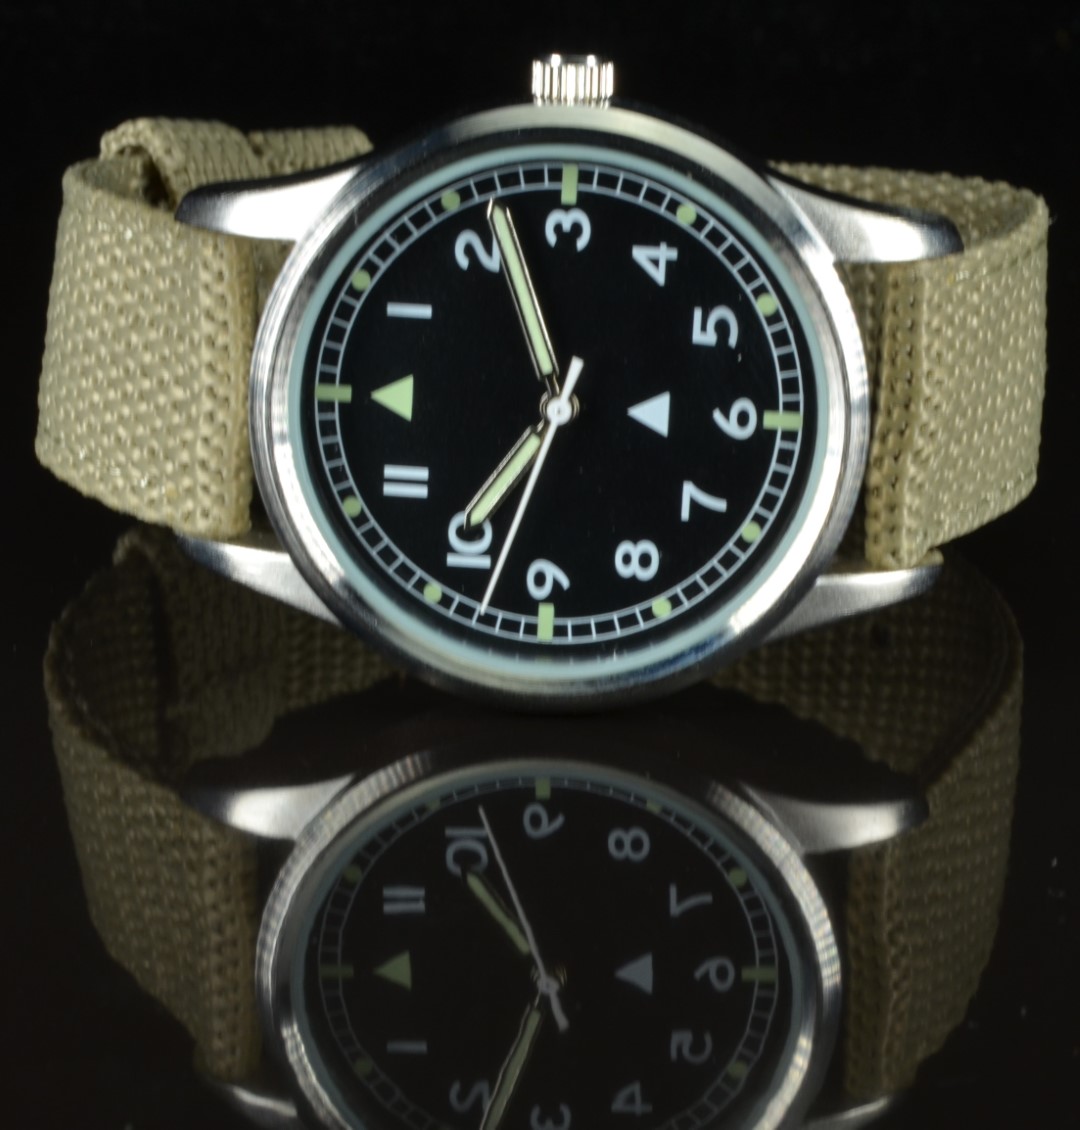 British RAF military style wristwatch with luminous hands and hour markers, white Arabic numerals, - Image 2 of 3